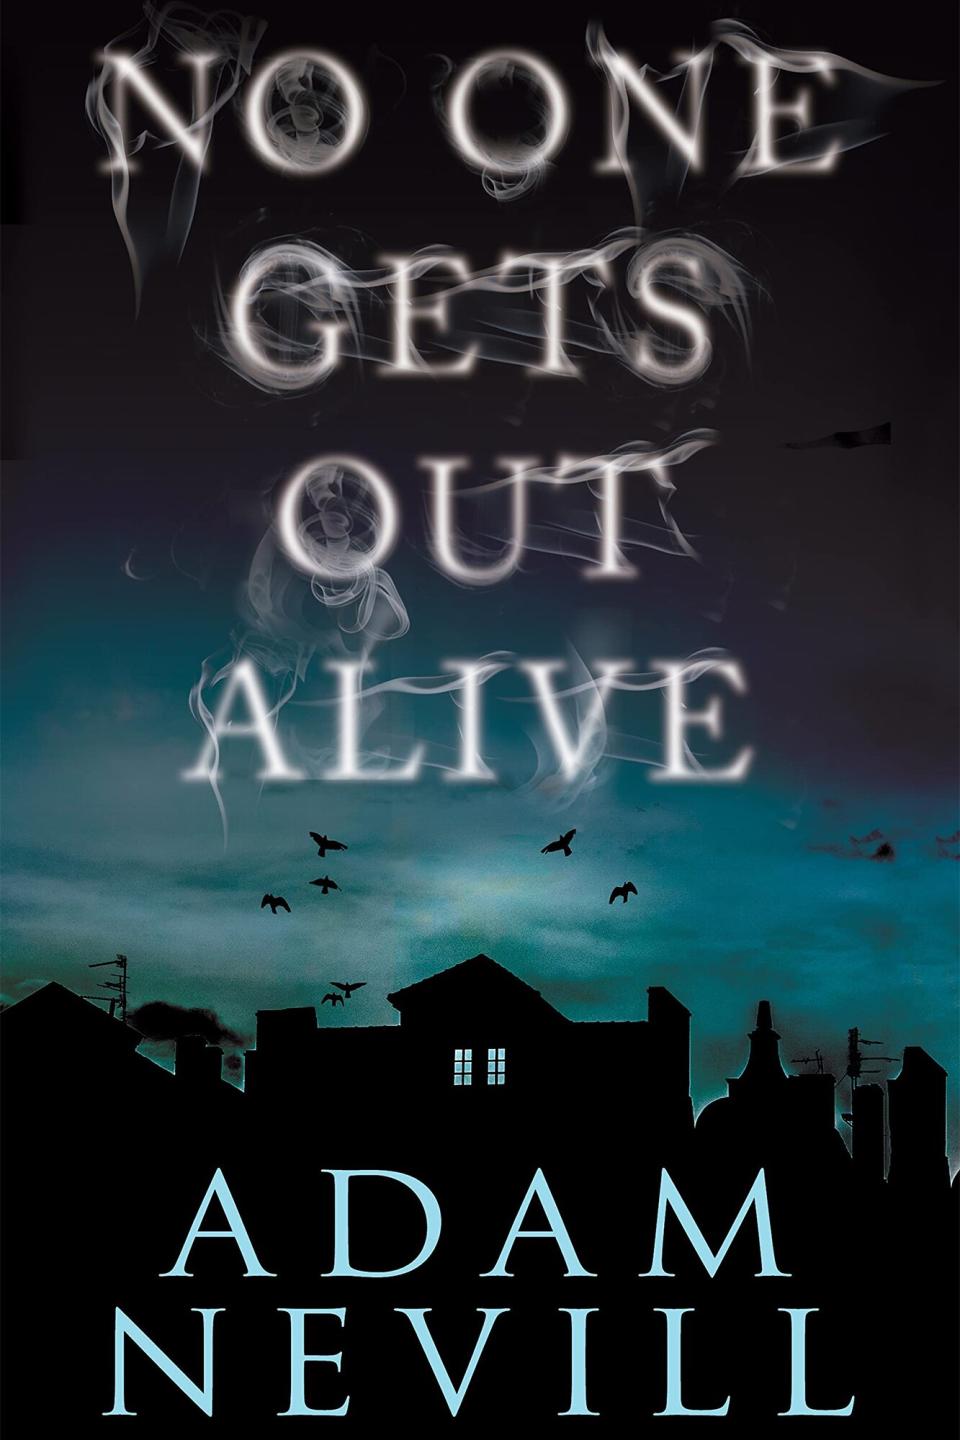 No One Gets Out Alive: A Novel – April 28, 2015 by Adam Nevill